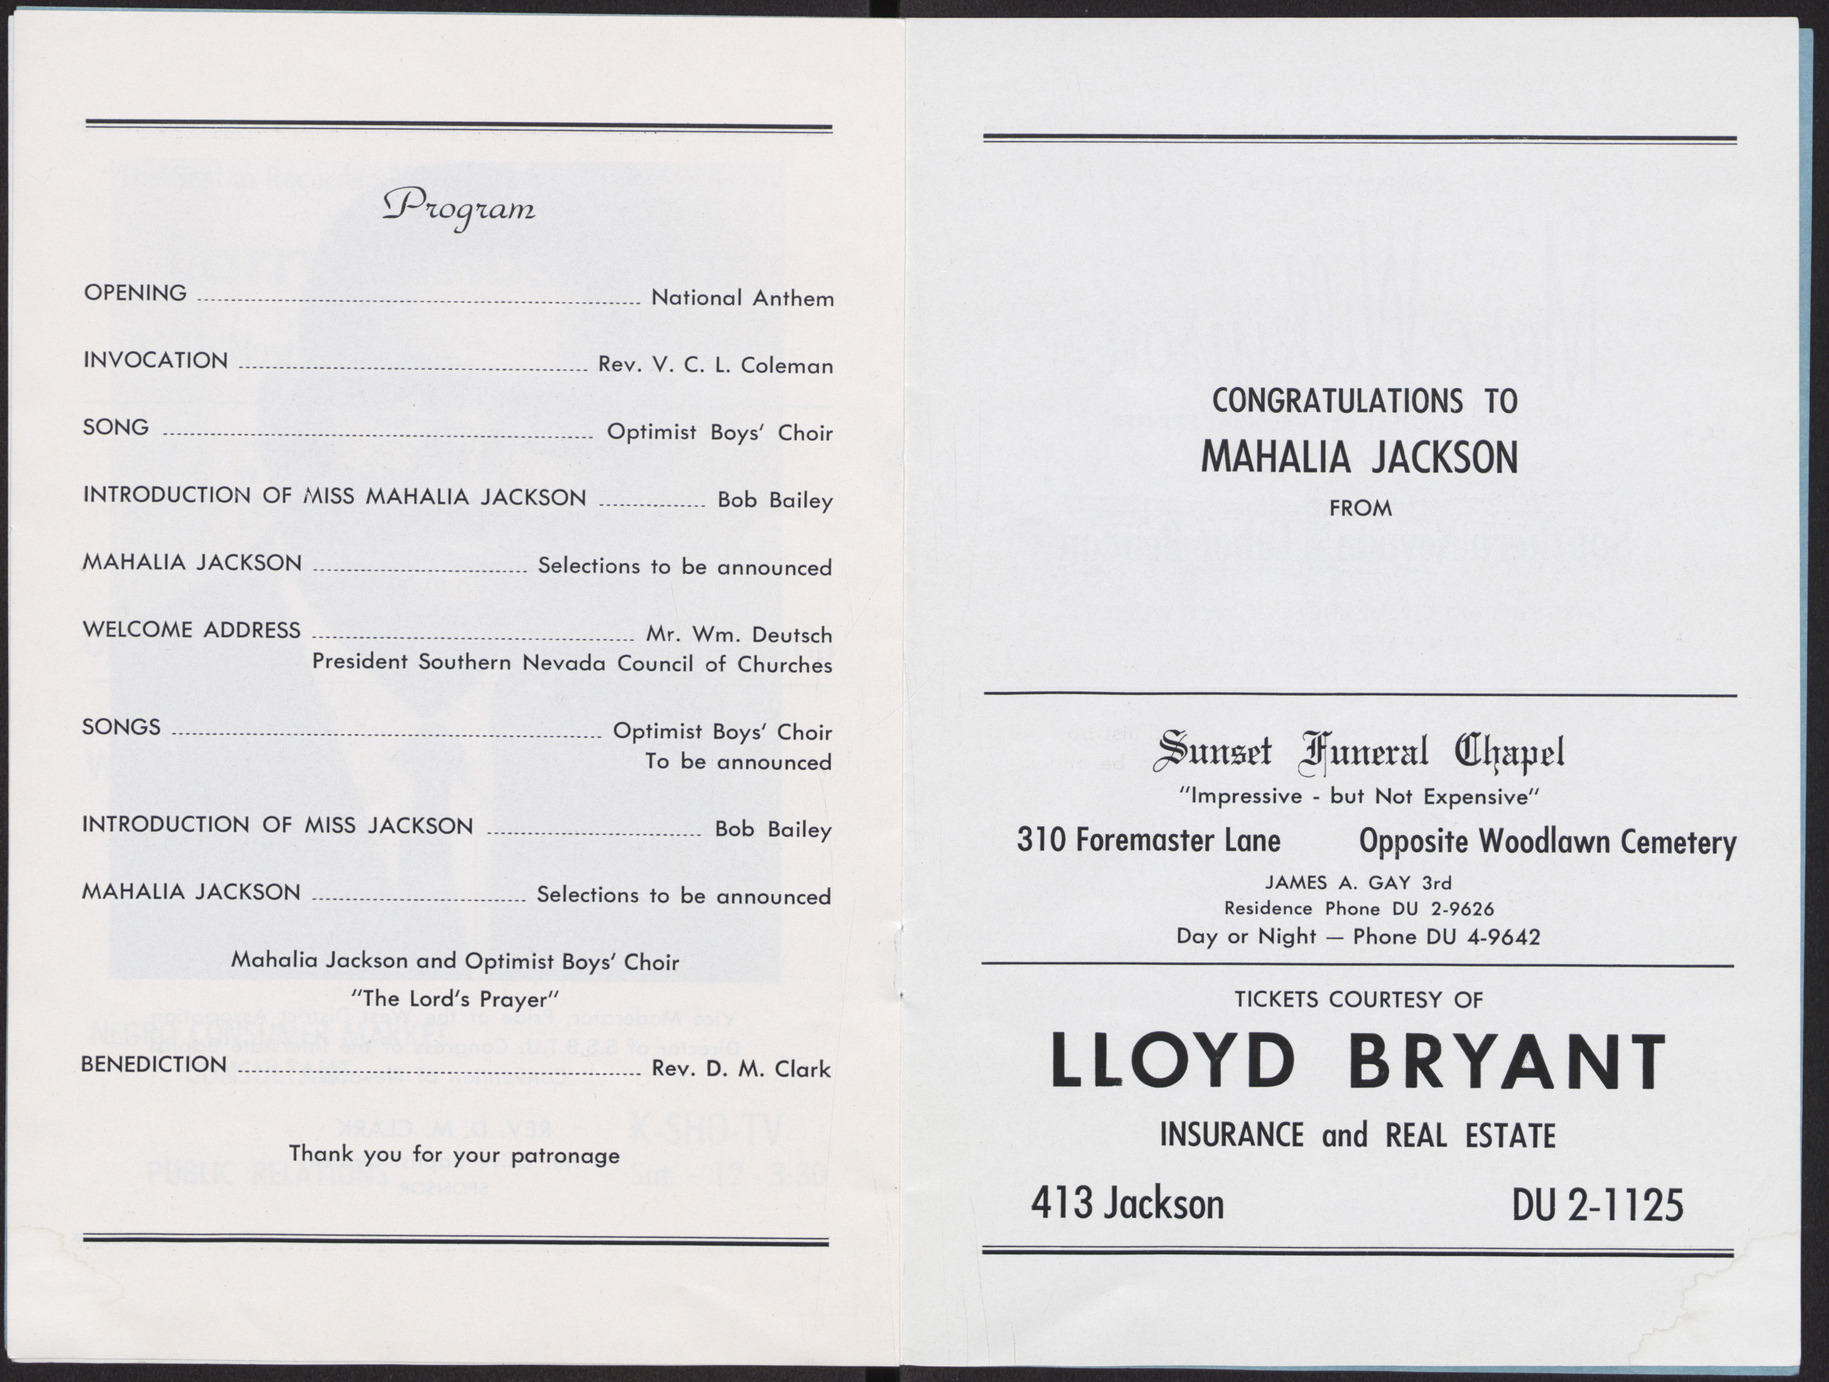 Program for event at Las Vegas Conventional Hall, August 9, 1959, page 7-8